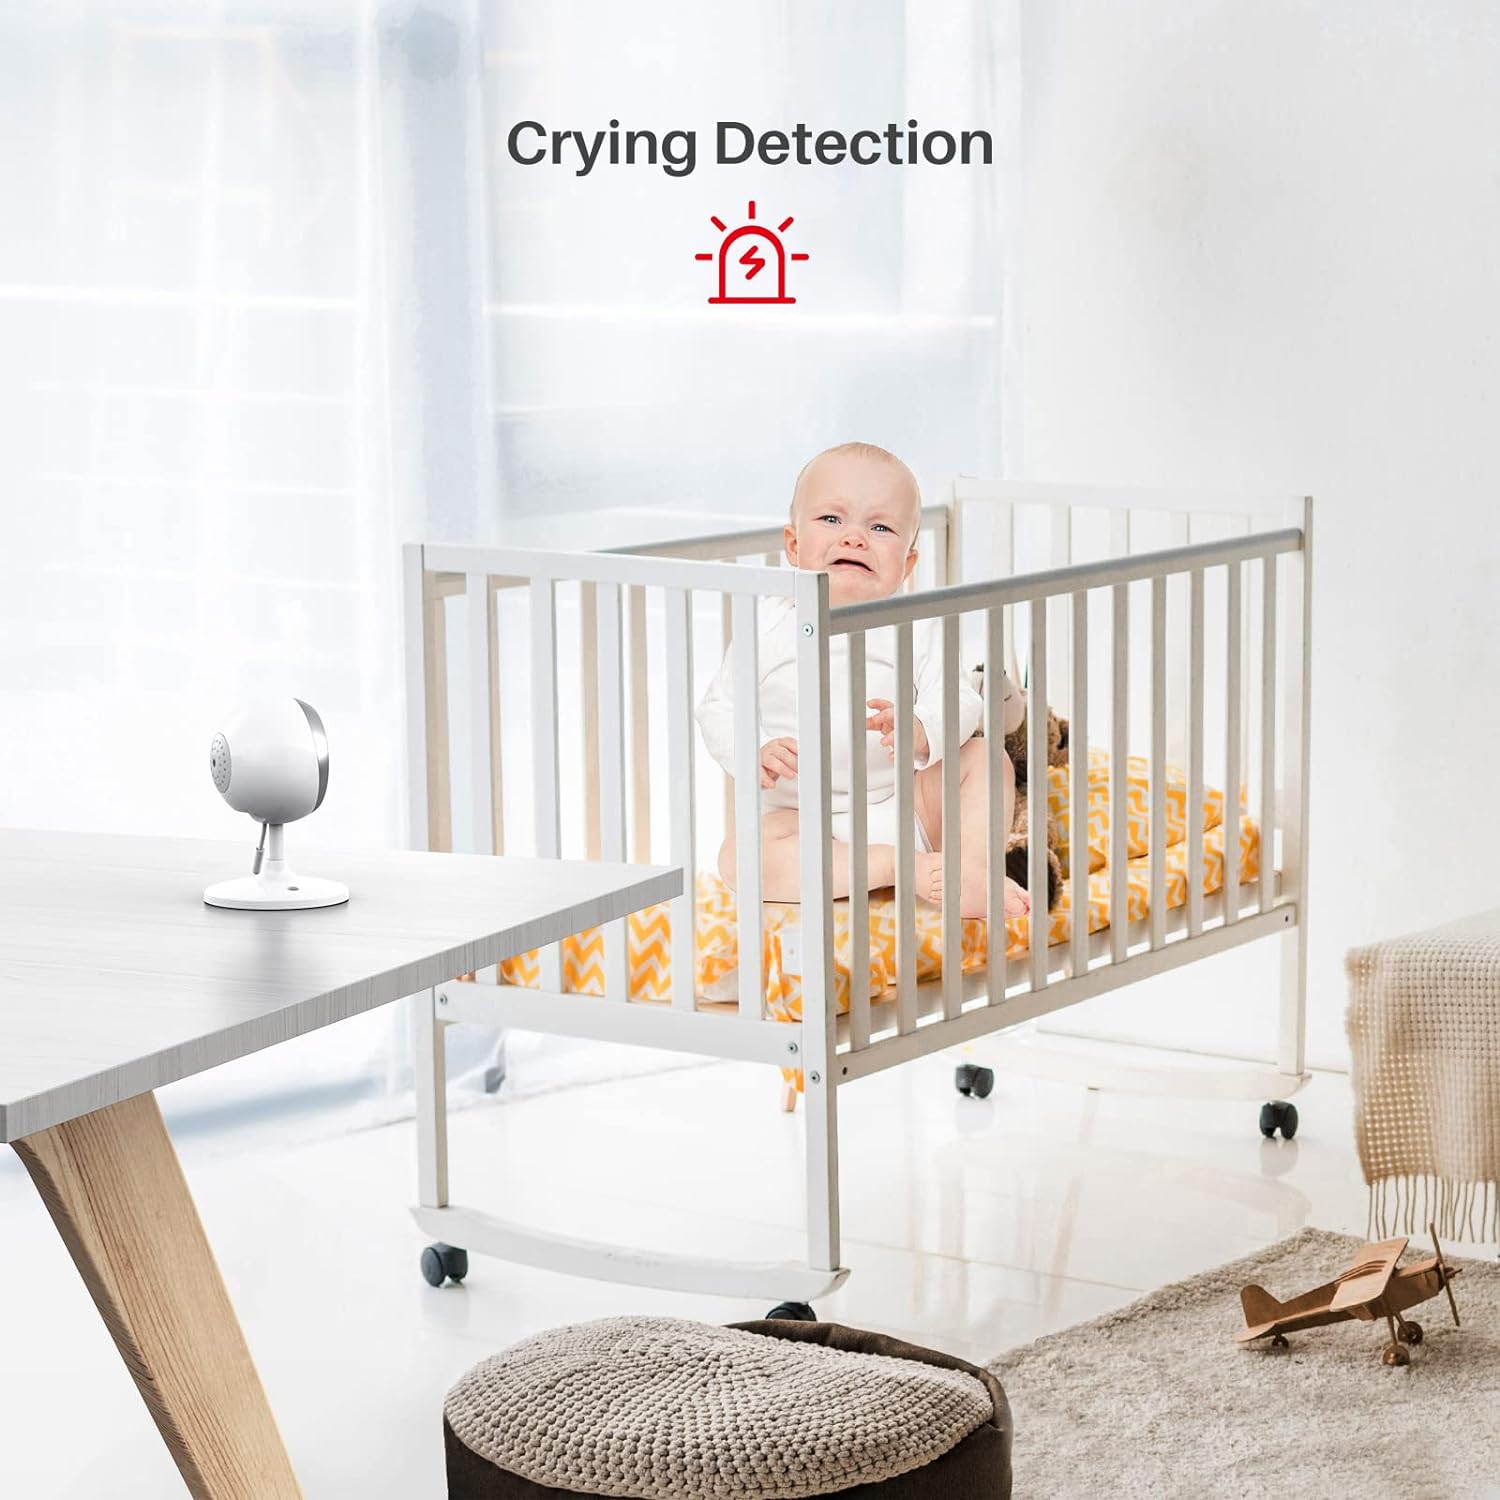 Baby Monitor with Video and Audio,SMONET 1080P Baby Monitor with 2 Cameras Remote Pan Tilt Feed Alarm Two-Way Talk Night Vision Crying Alarm